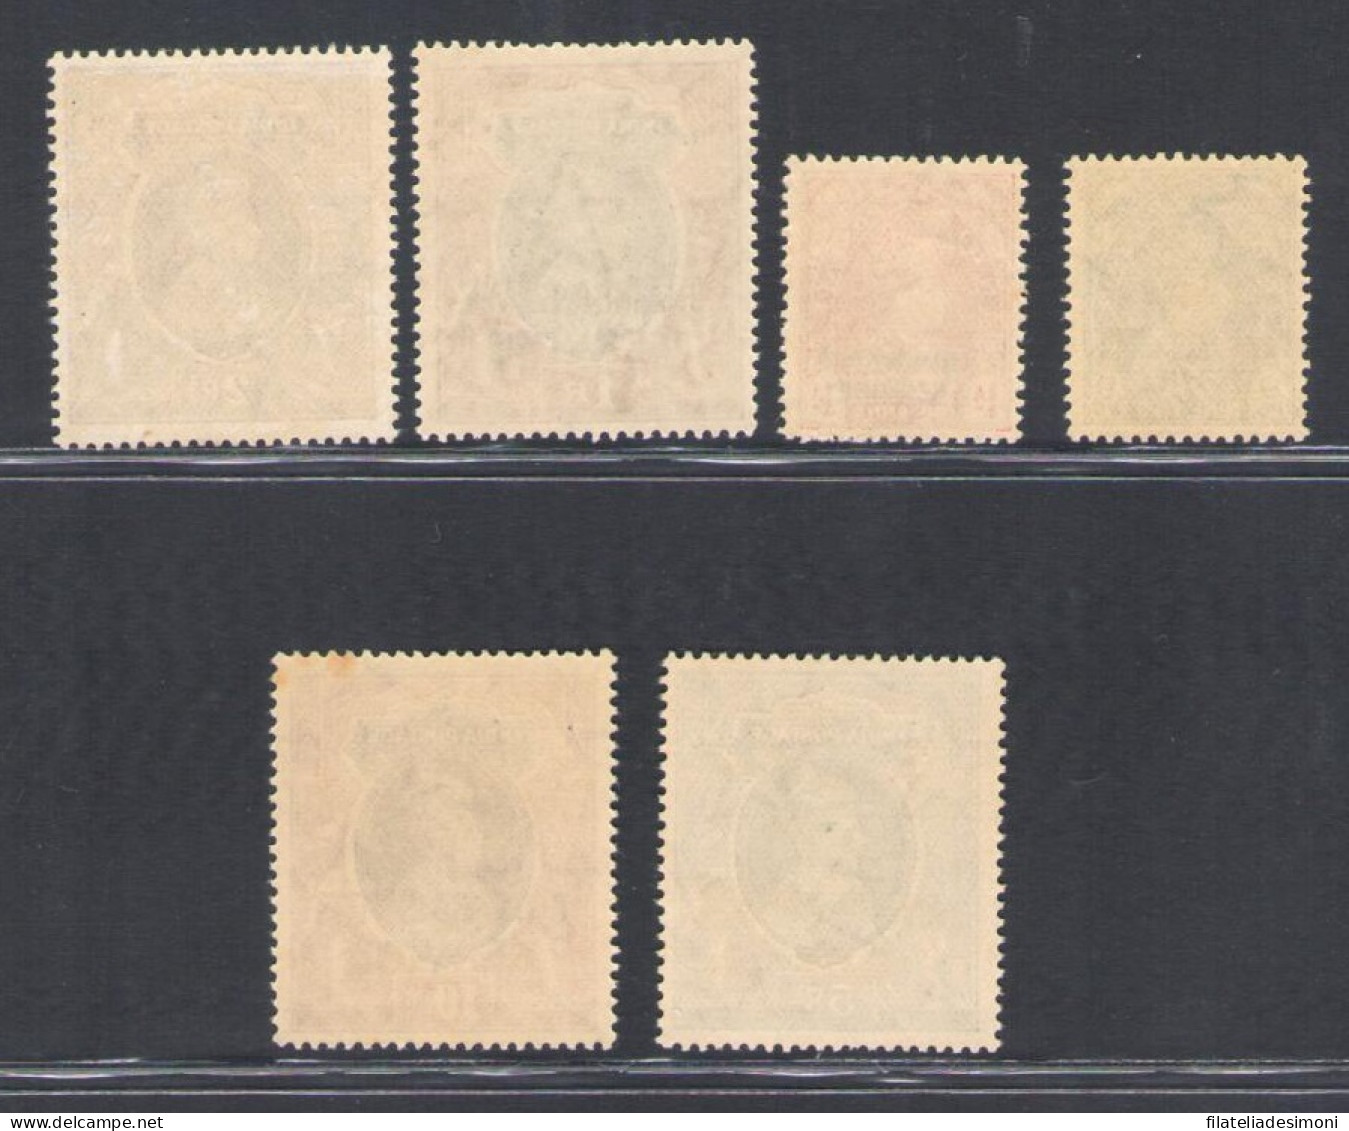 1938-40 India - Chamba State Service Stanley Gibbson N. 66/71 - MNH** - Other & Unclassified